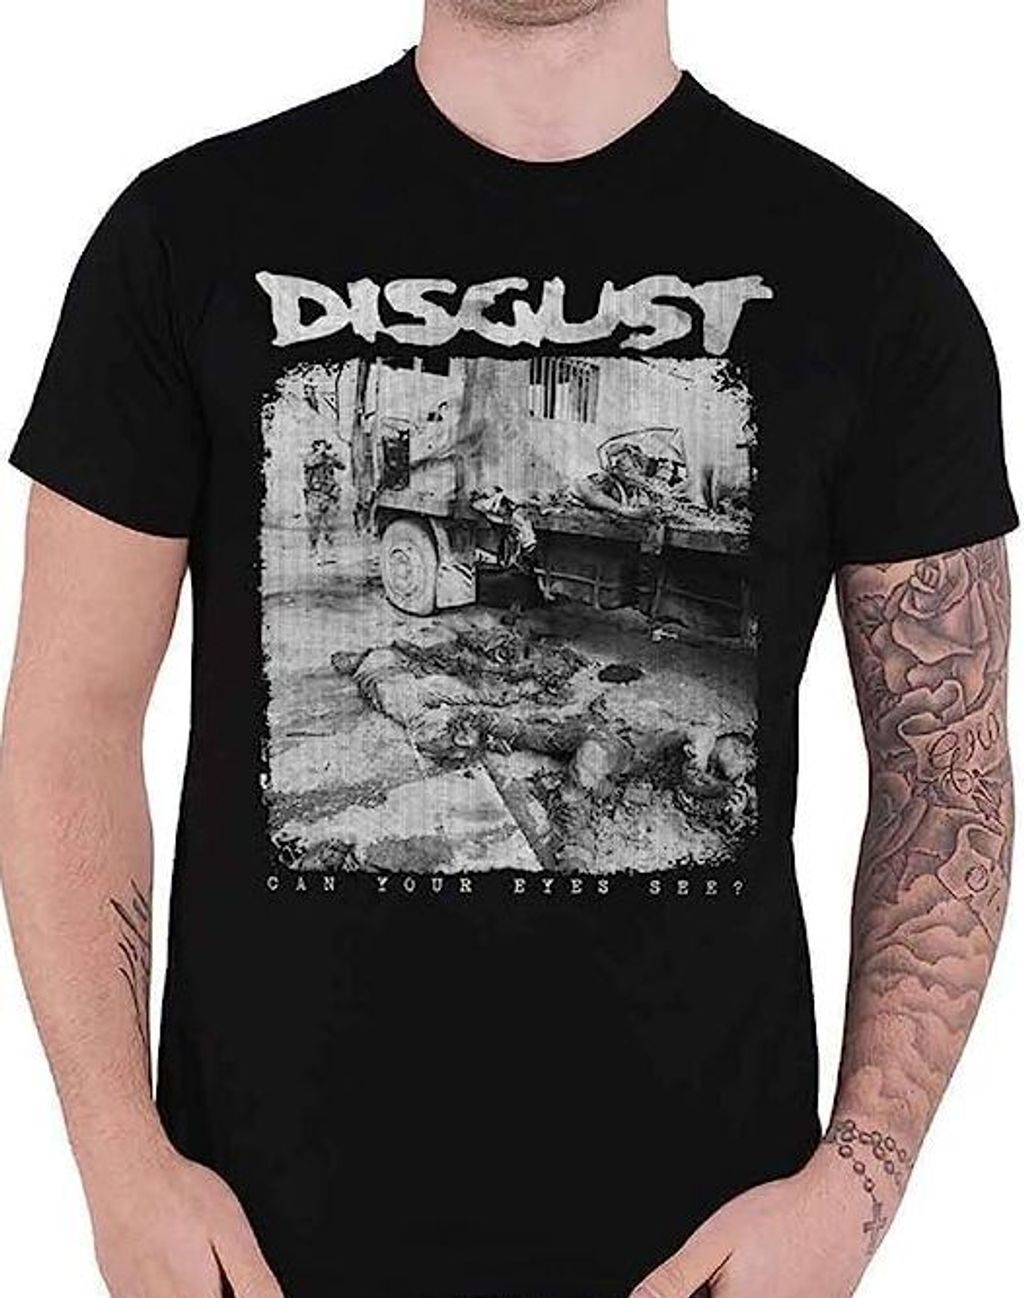 DISGUST Can Your Eyes See Tshirt (size M)